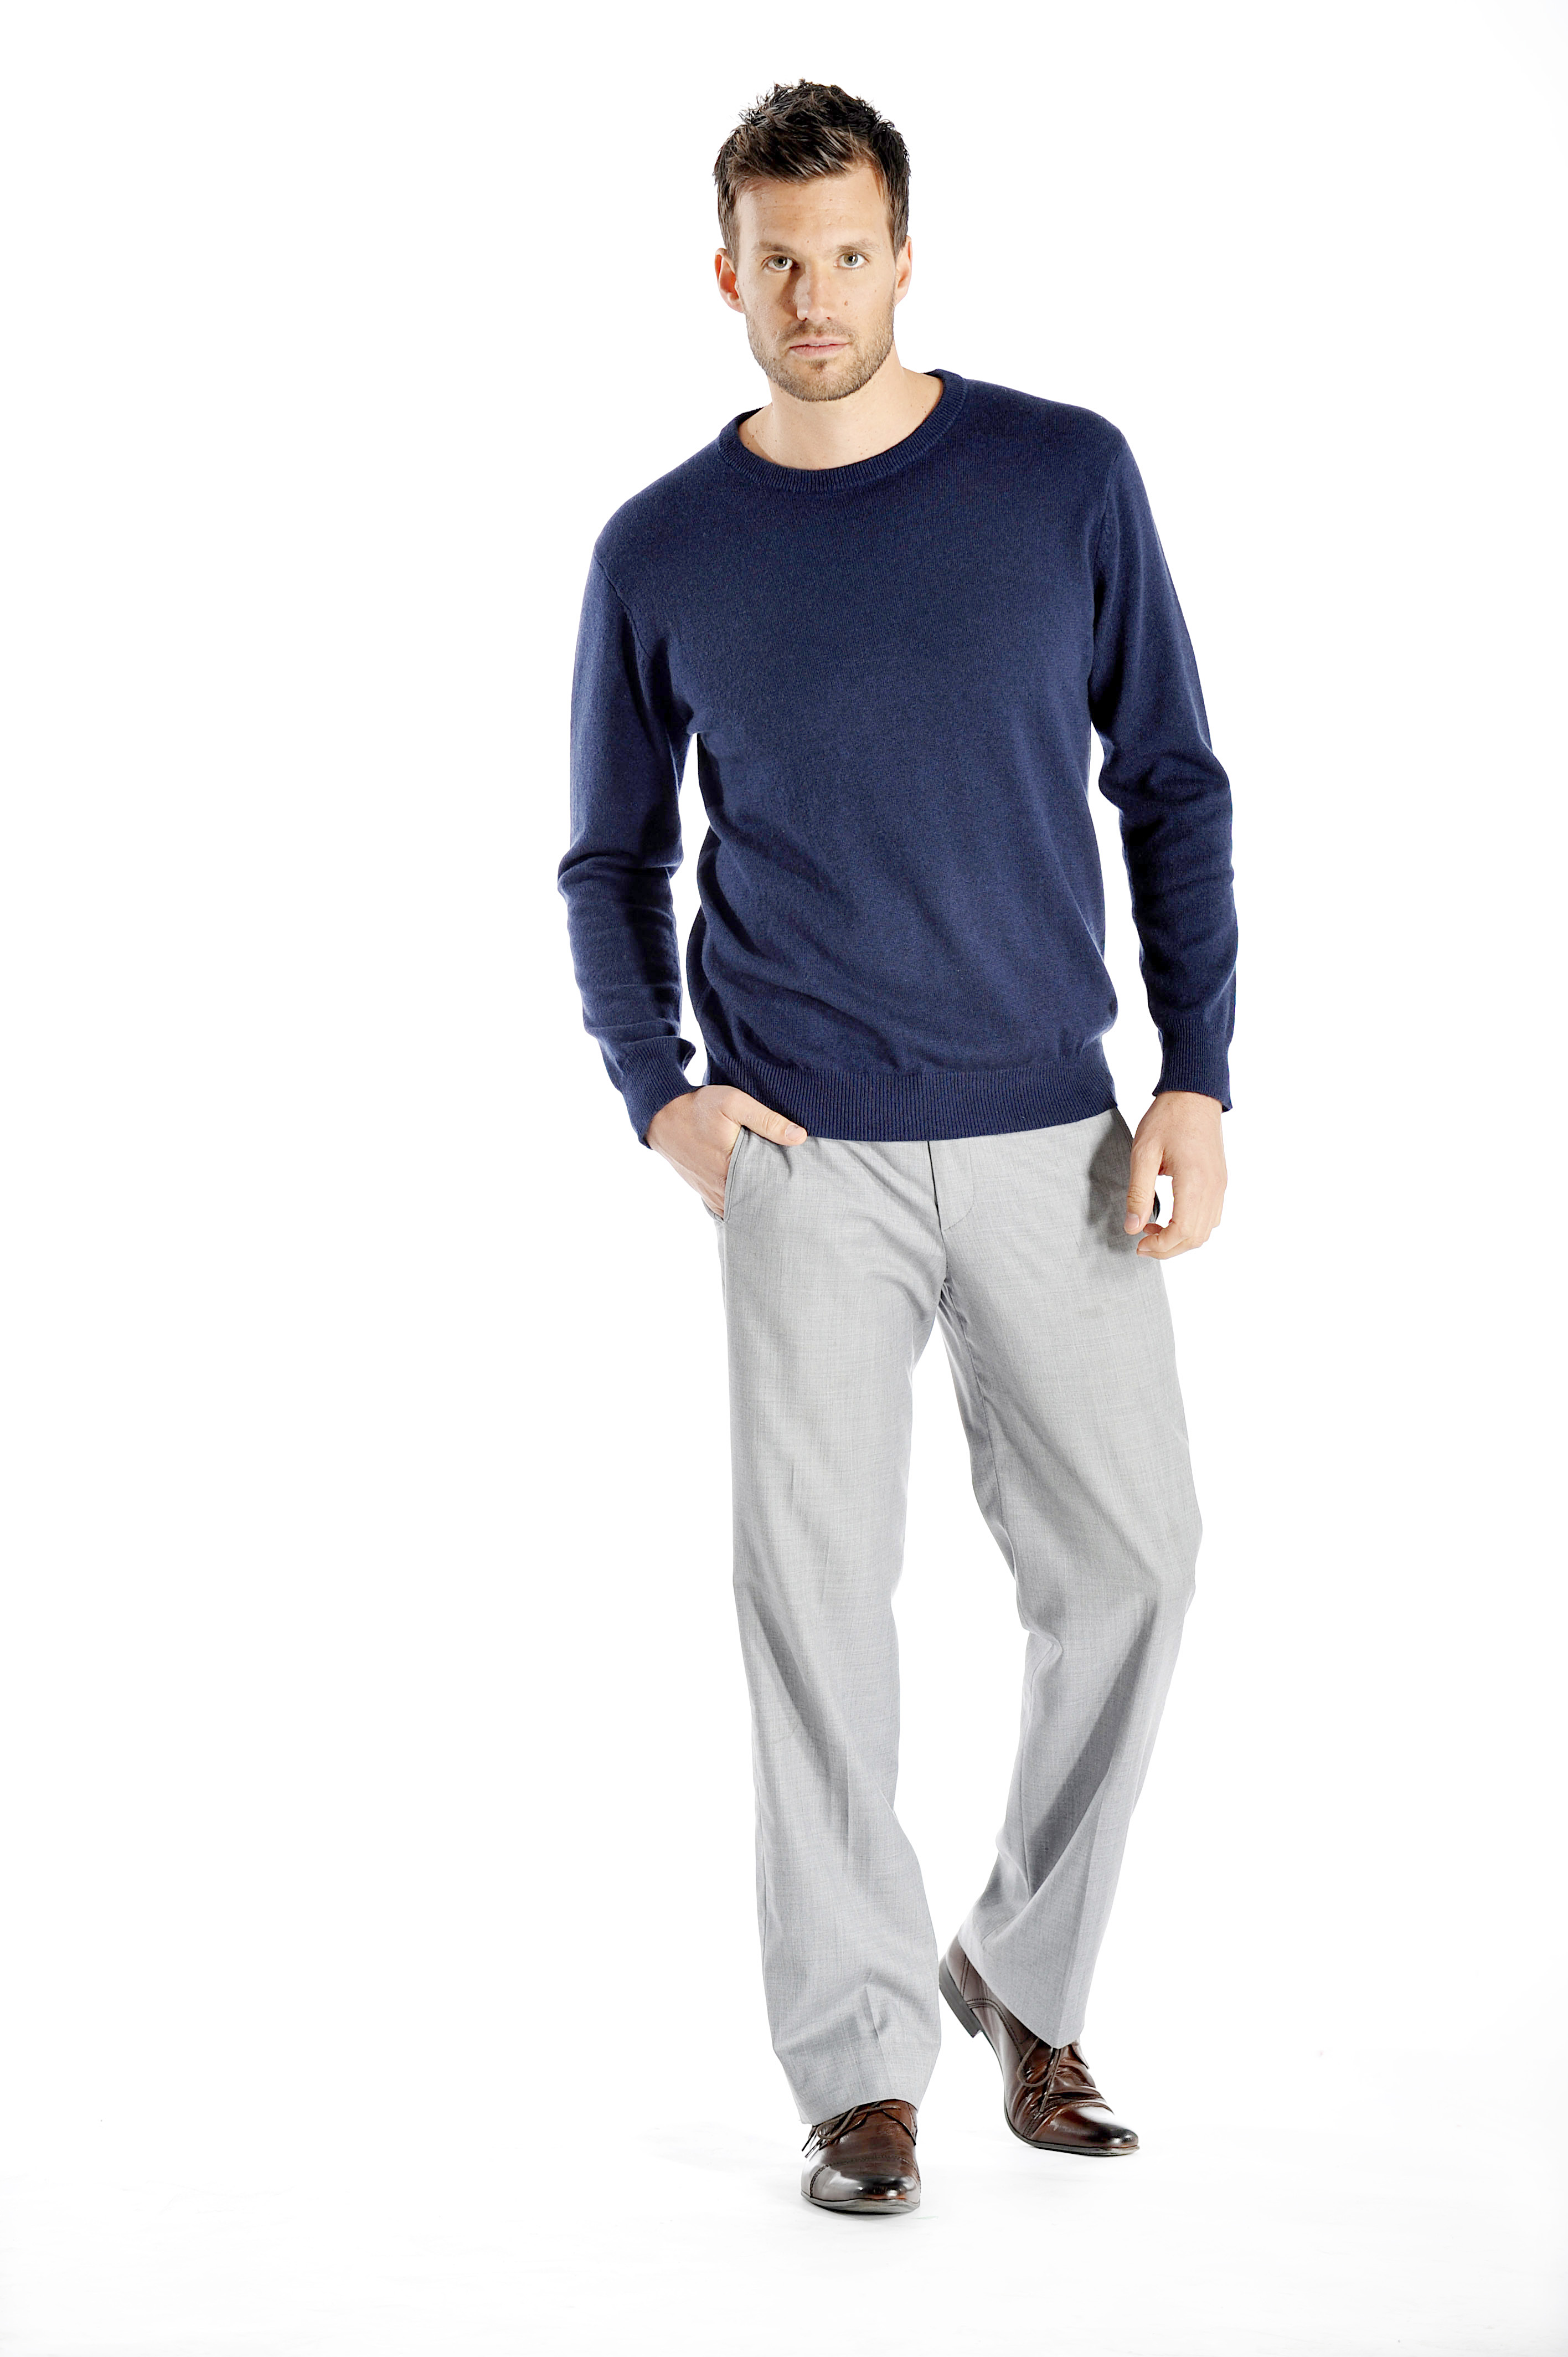 Men\'s Crew Neck Cashmere Sweater (Charcoal, Small)